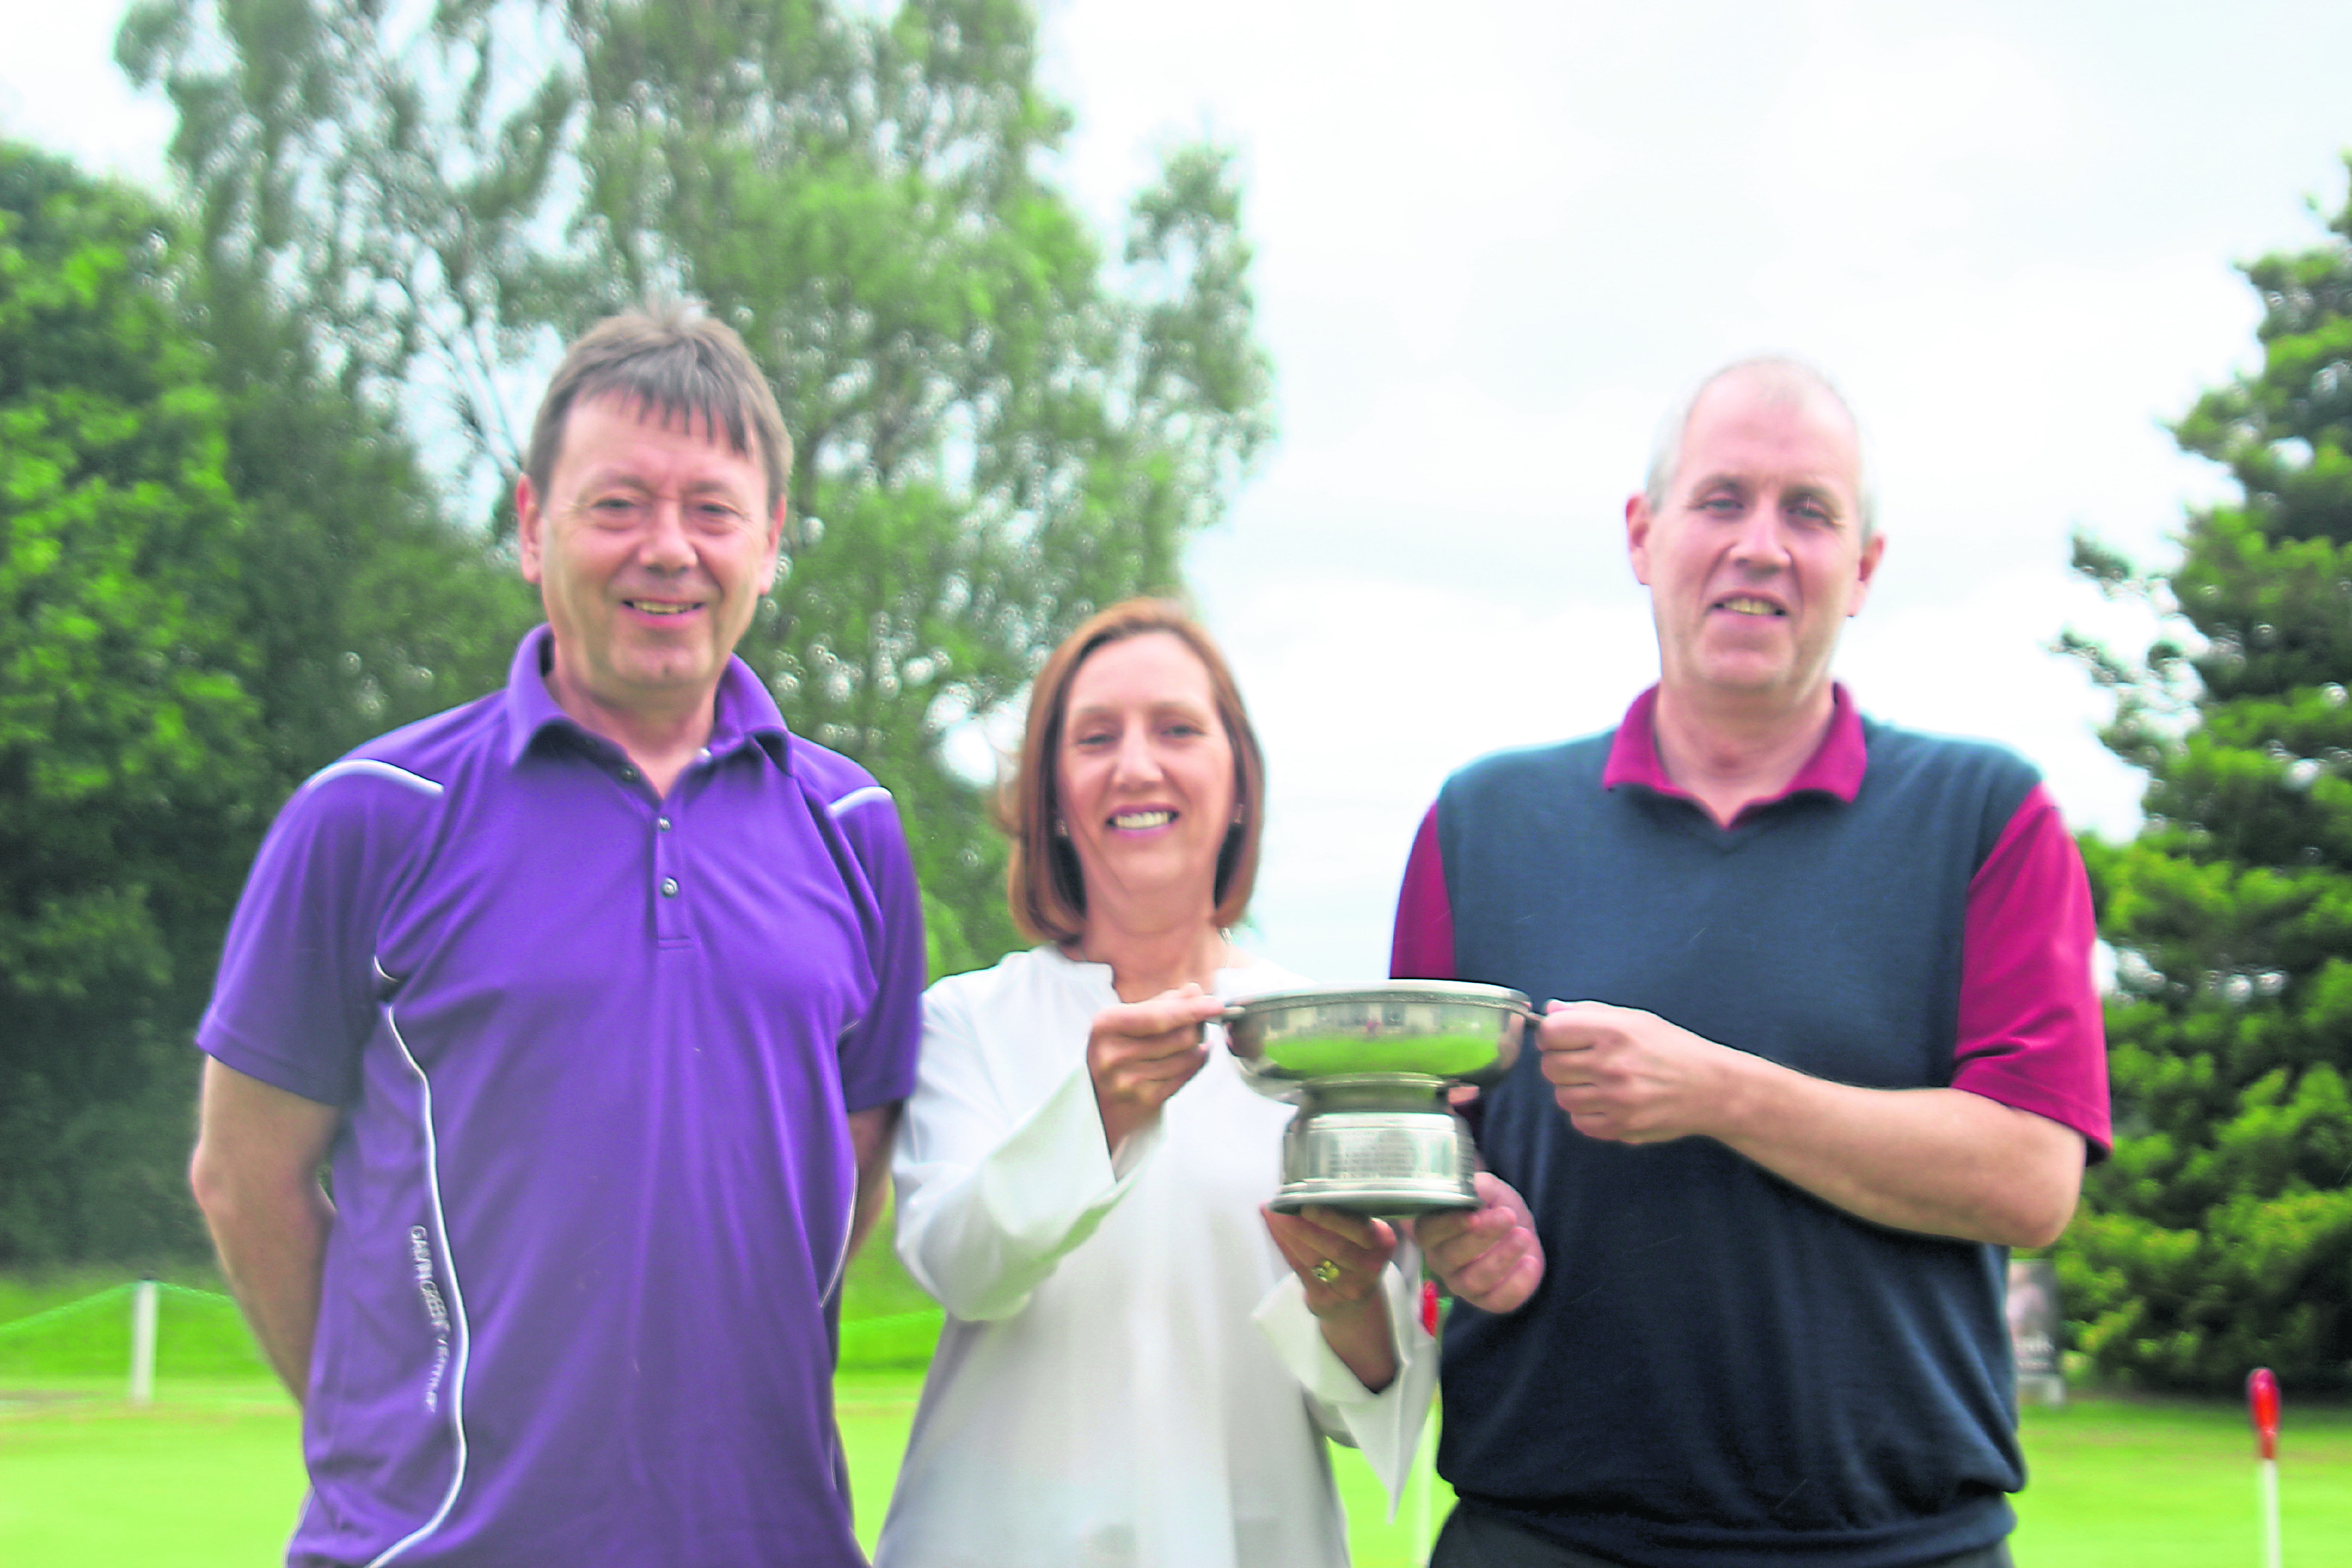 Simon Jack (left), who finished second in the handicap competition, The Press and Journal's Alice MacLeod (centre) and scratch competition winner John Mackay (right)